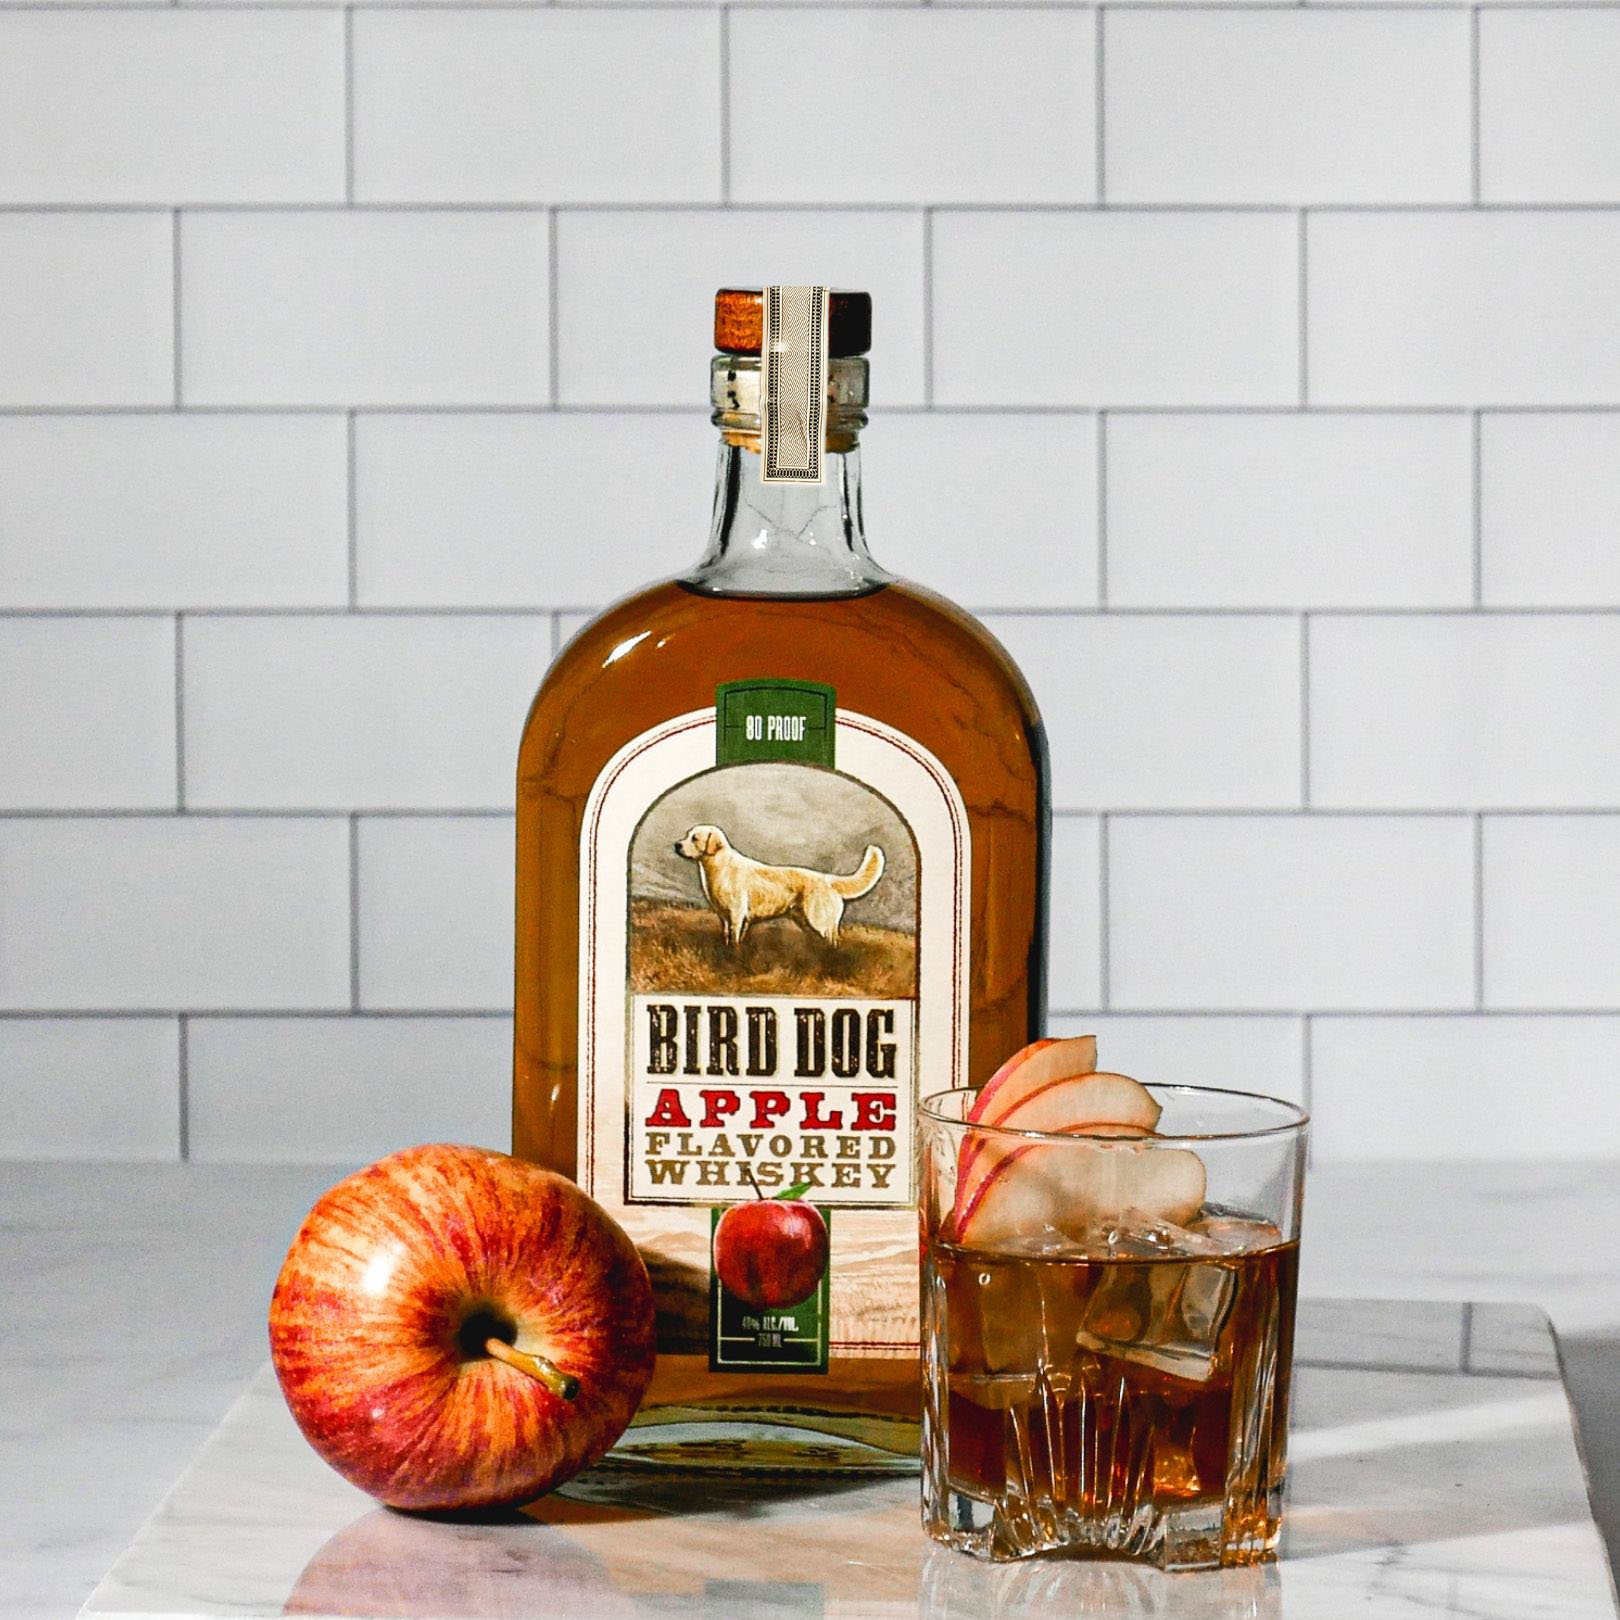 Bottle of Bird Dog Apple Whiskey Next to a Cocktail and Apple